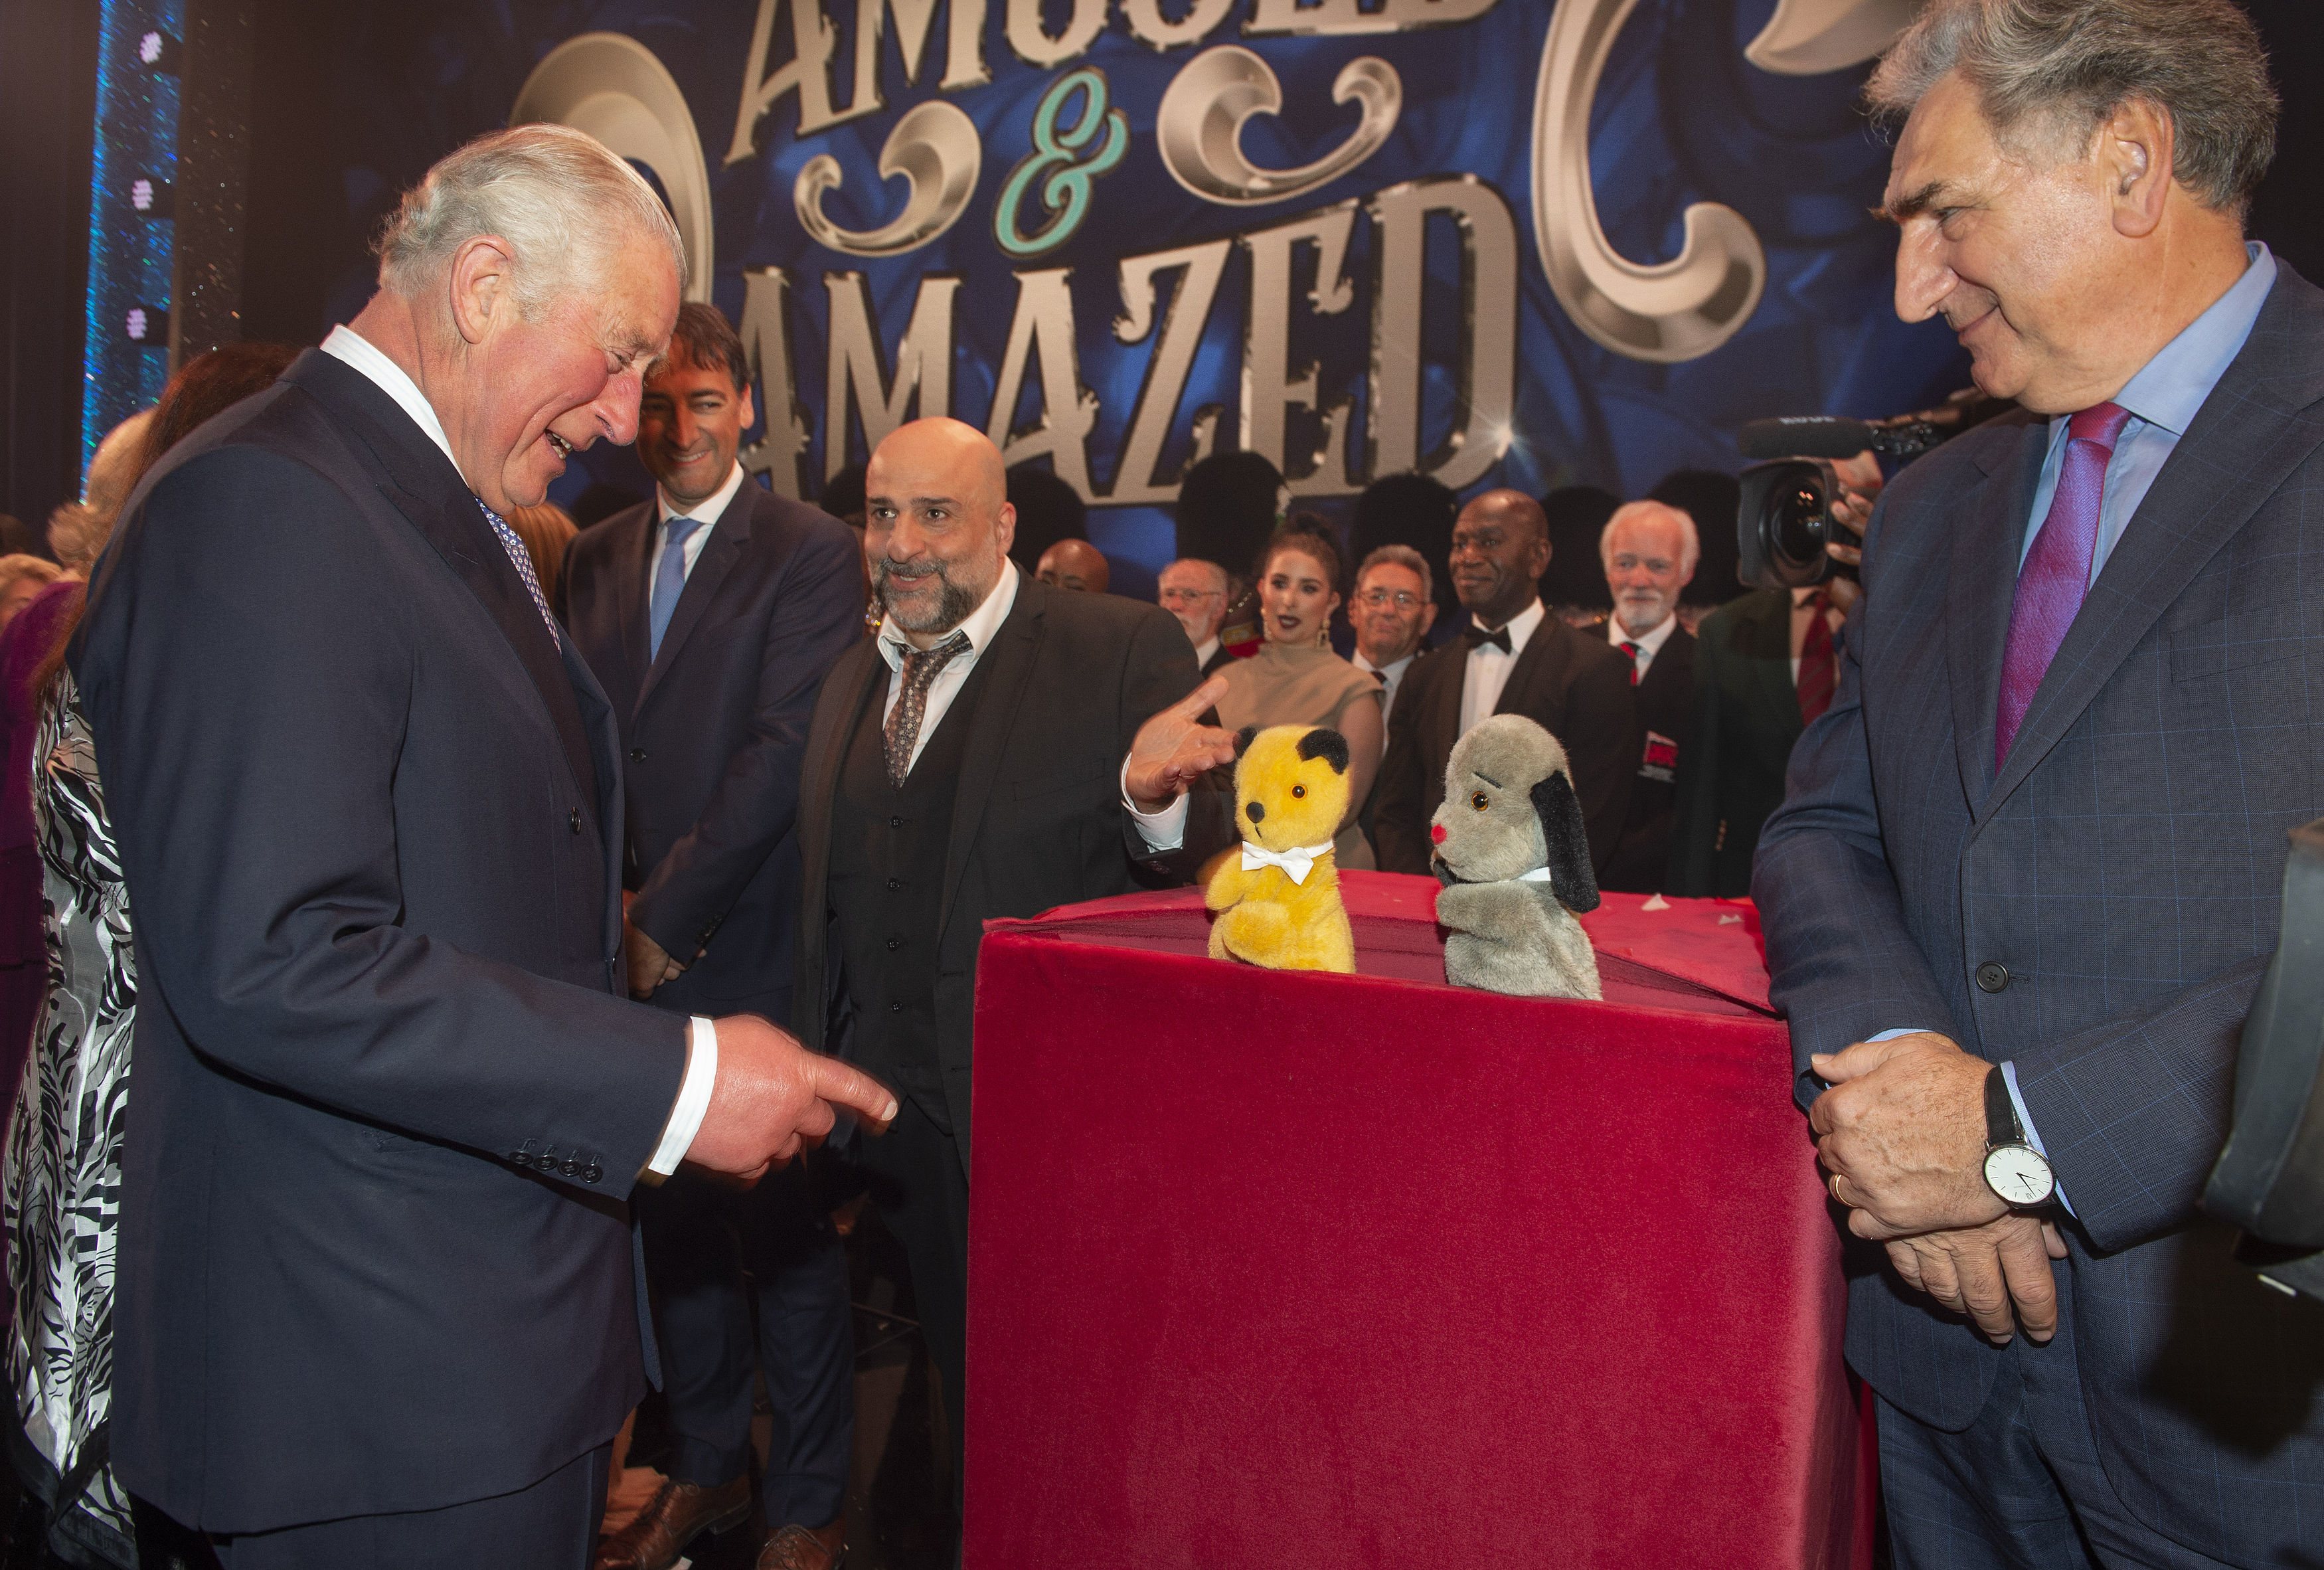 The King, then Prince of Wales, met Sooty and Sweep after the We Are Most Amused and Amazed performance at the London Palladium in 2018